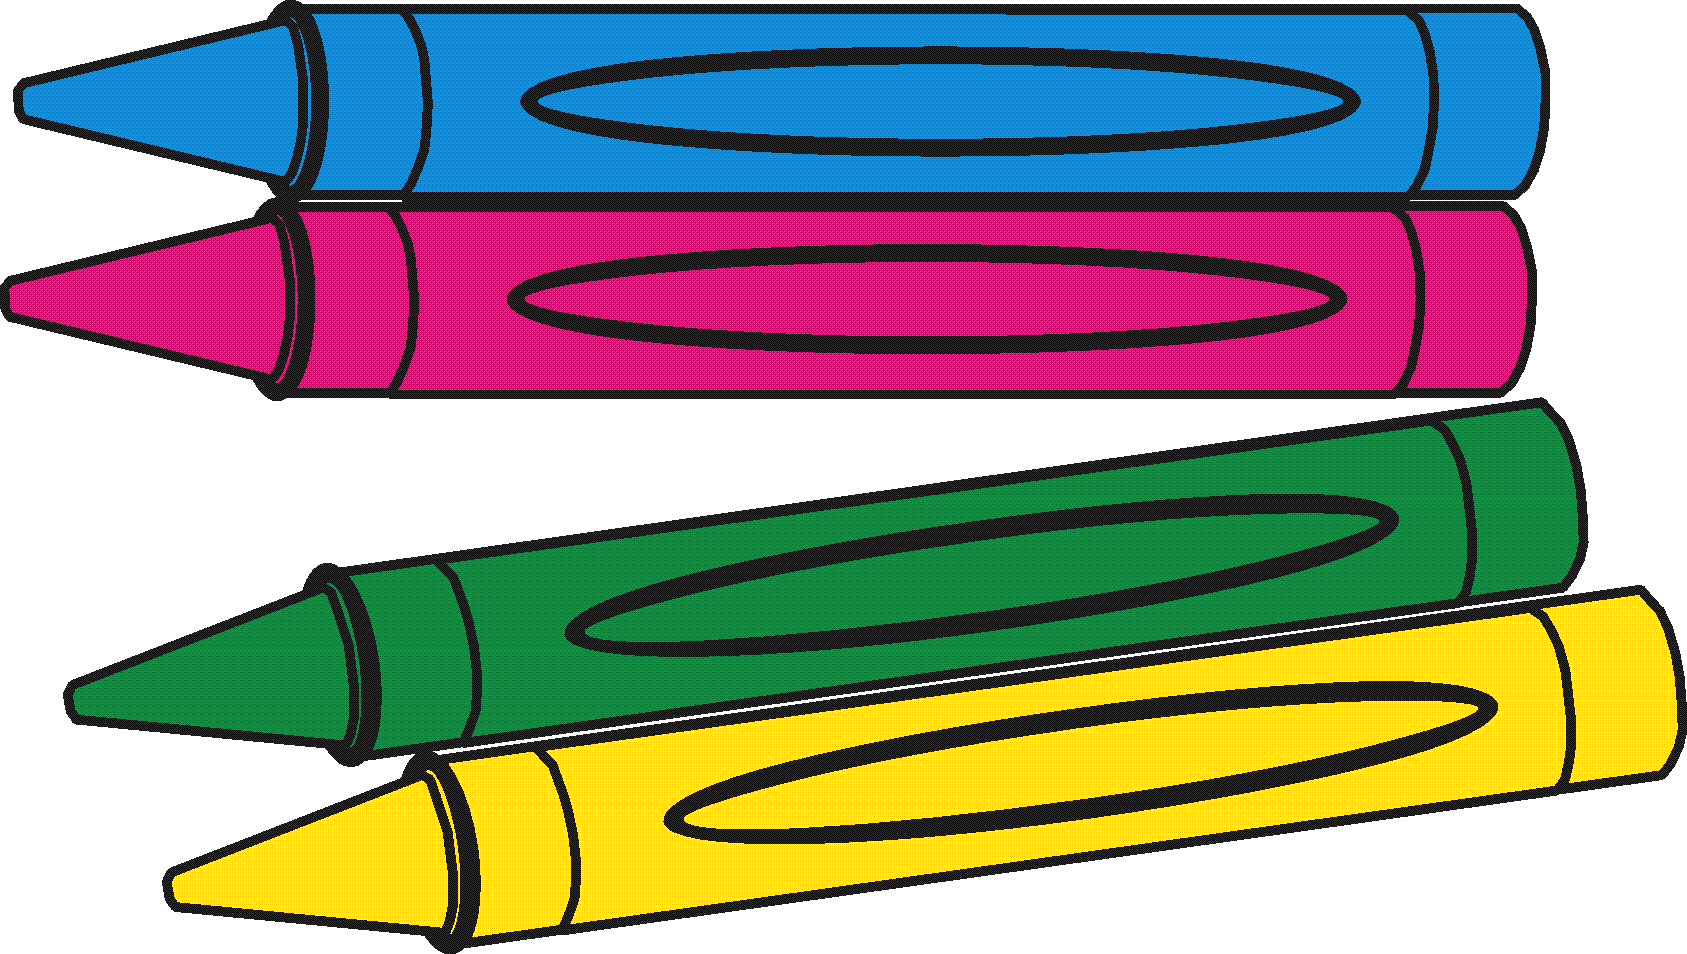 Green Crayon Clip Art | Clipart library - Free Clipart Images